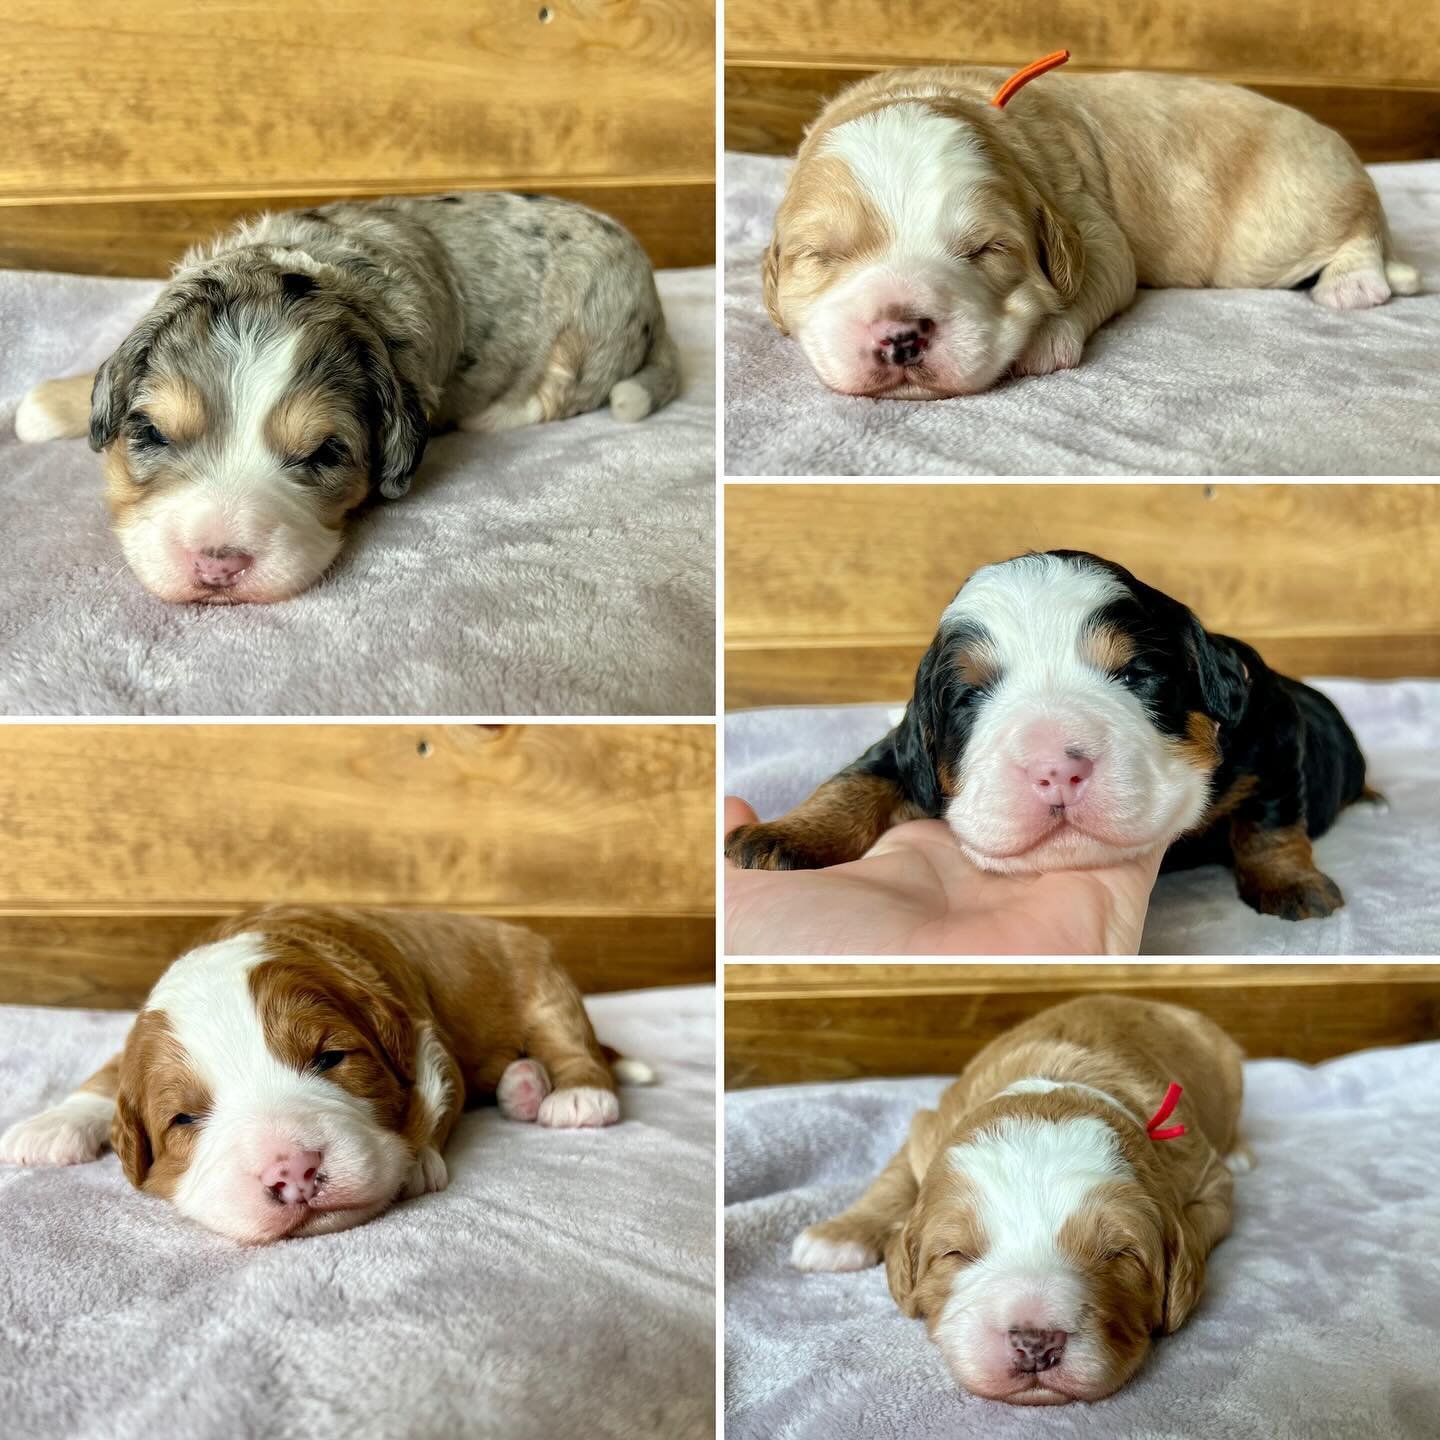 Introducing Maya&rsquo;s tree litter. Two weeks old, I cant believe it. Swipe to see these cuties up close, who&rsquo;s your favorite?! 
#bernedoodlelove #bernedoodlehub #bernedoodlepuppy #tricolorbernedoodle #redandwhitetuxedobernedoodle #merleberne